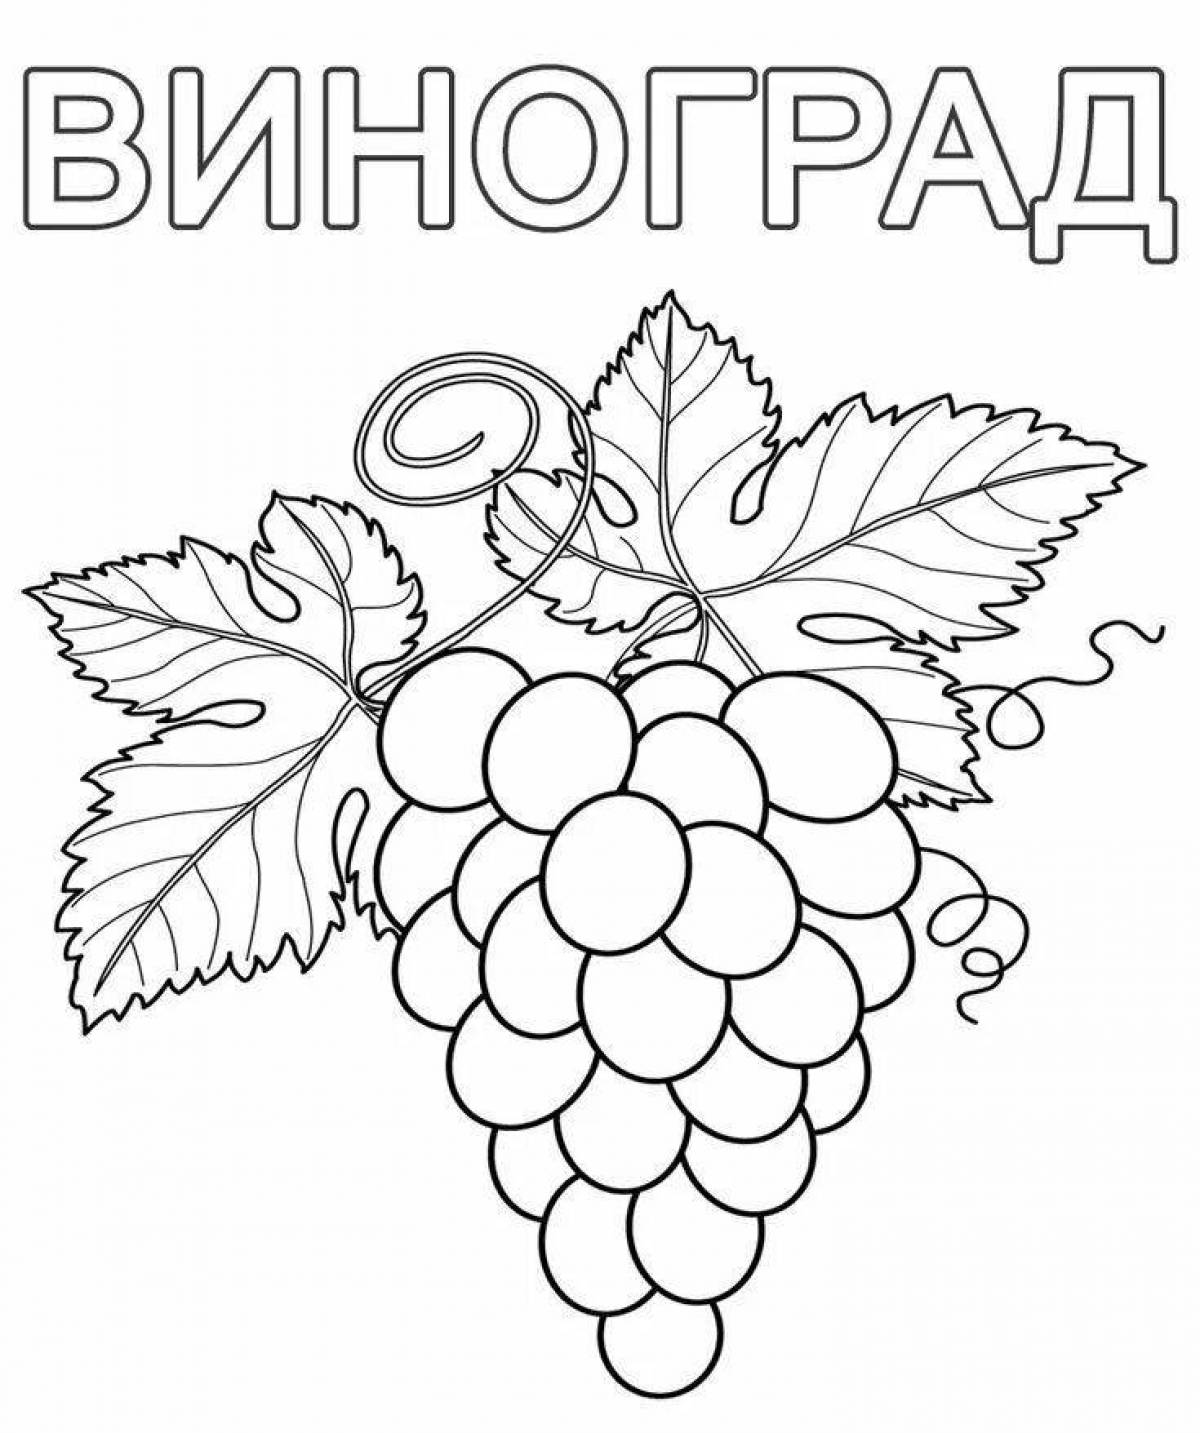 Colourful berries and fruits coloring book